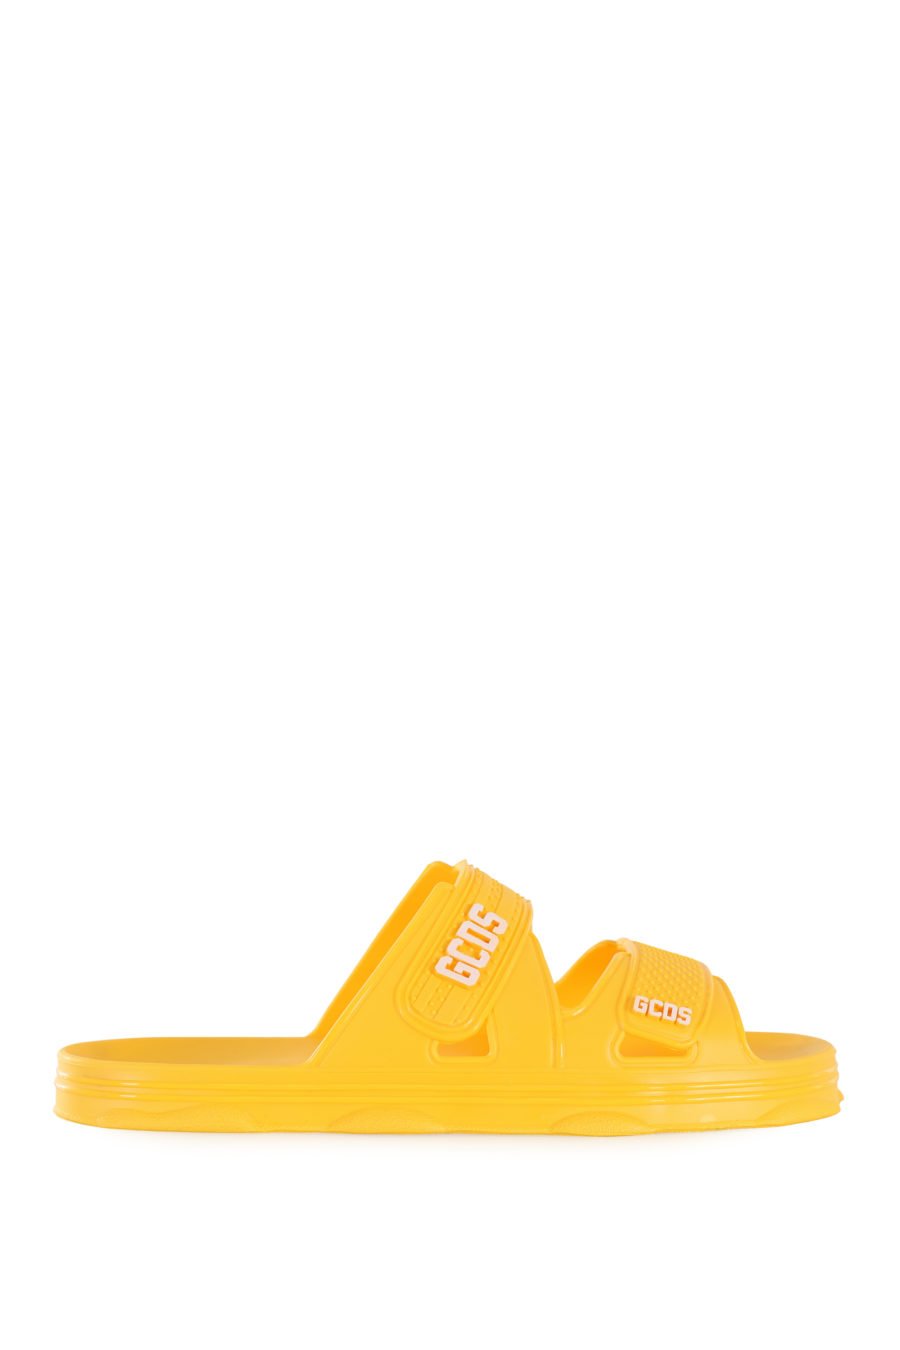 Yellow rubber flip flops with white logo - IMG 1684